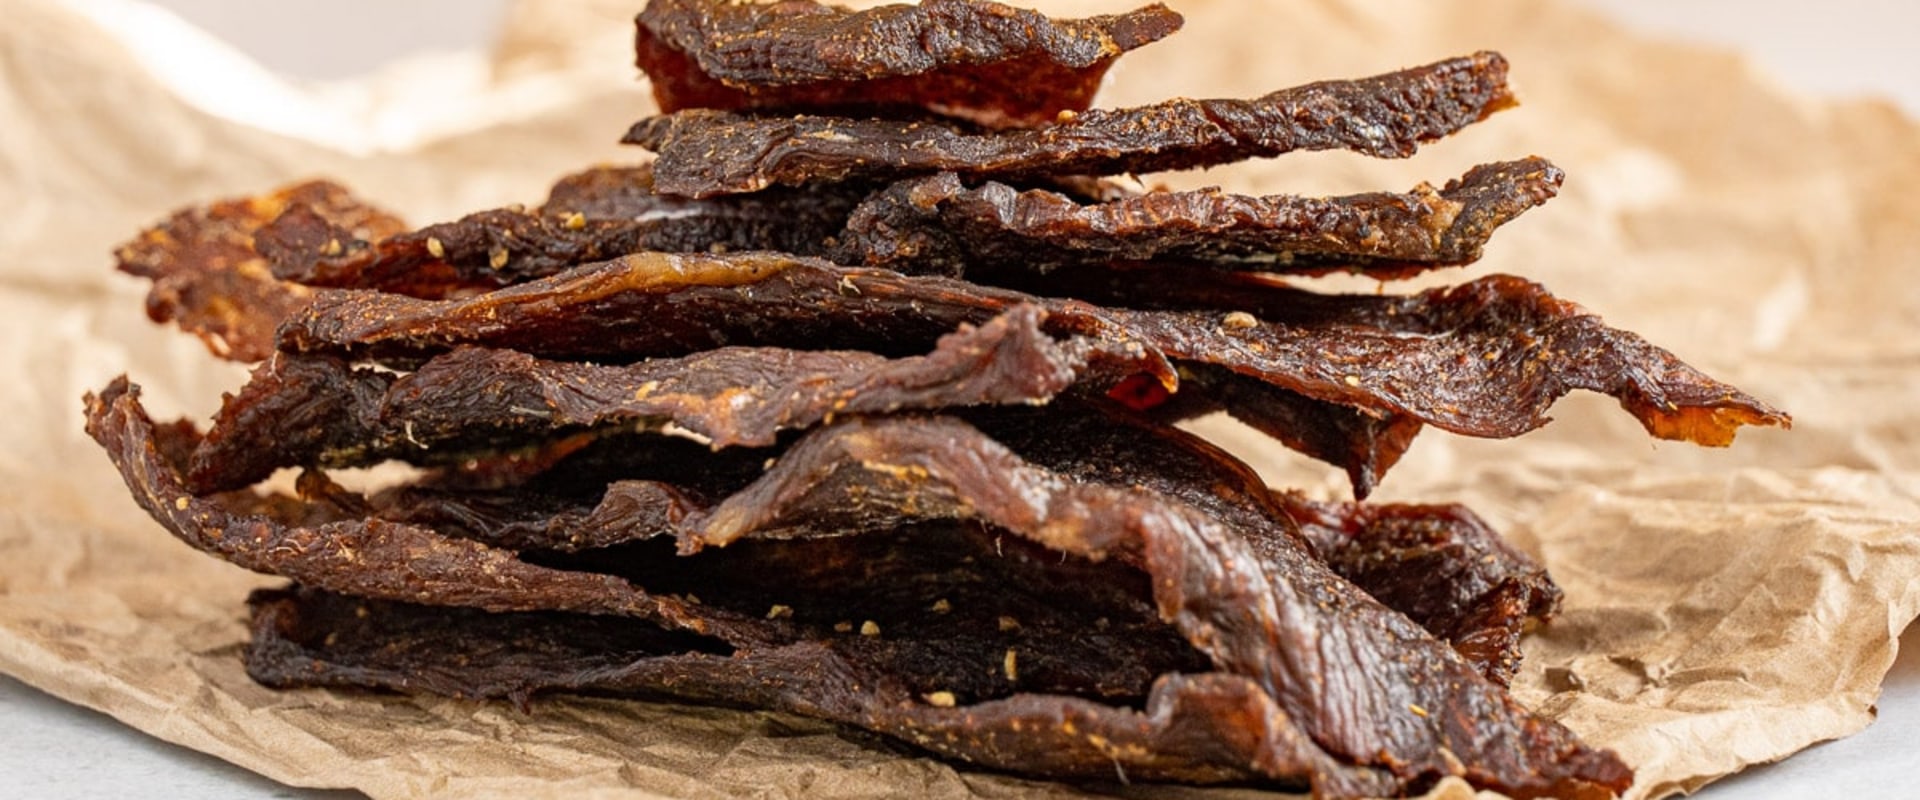 What is jerky made out of?